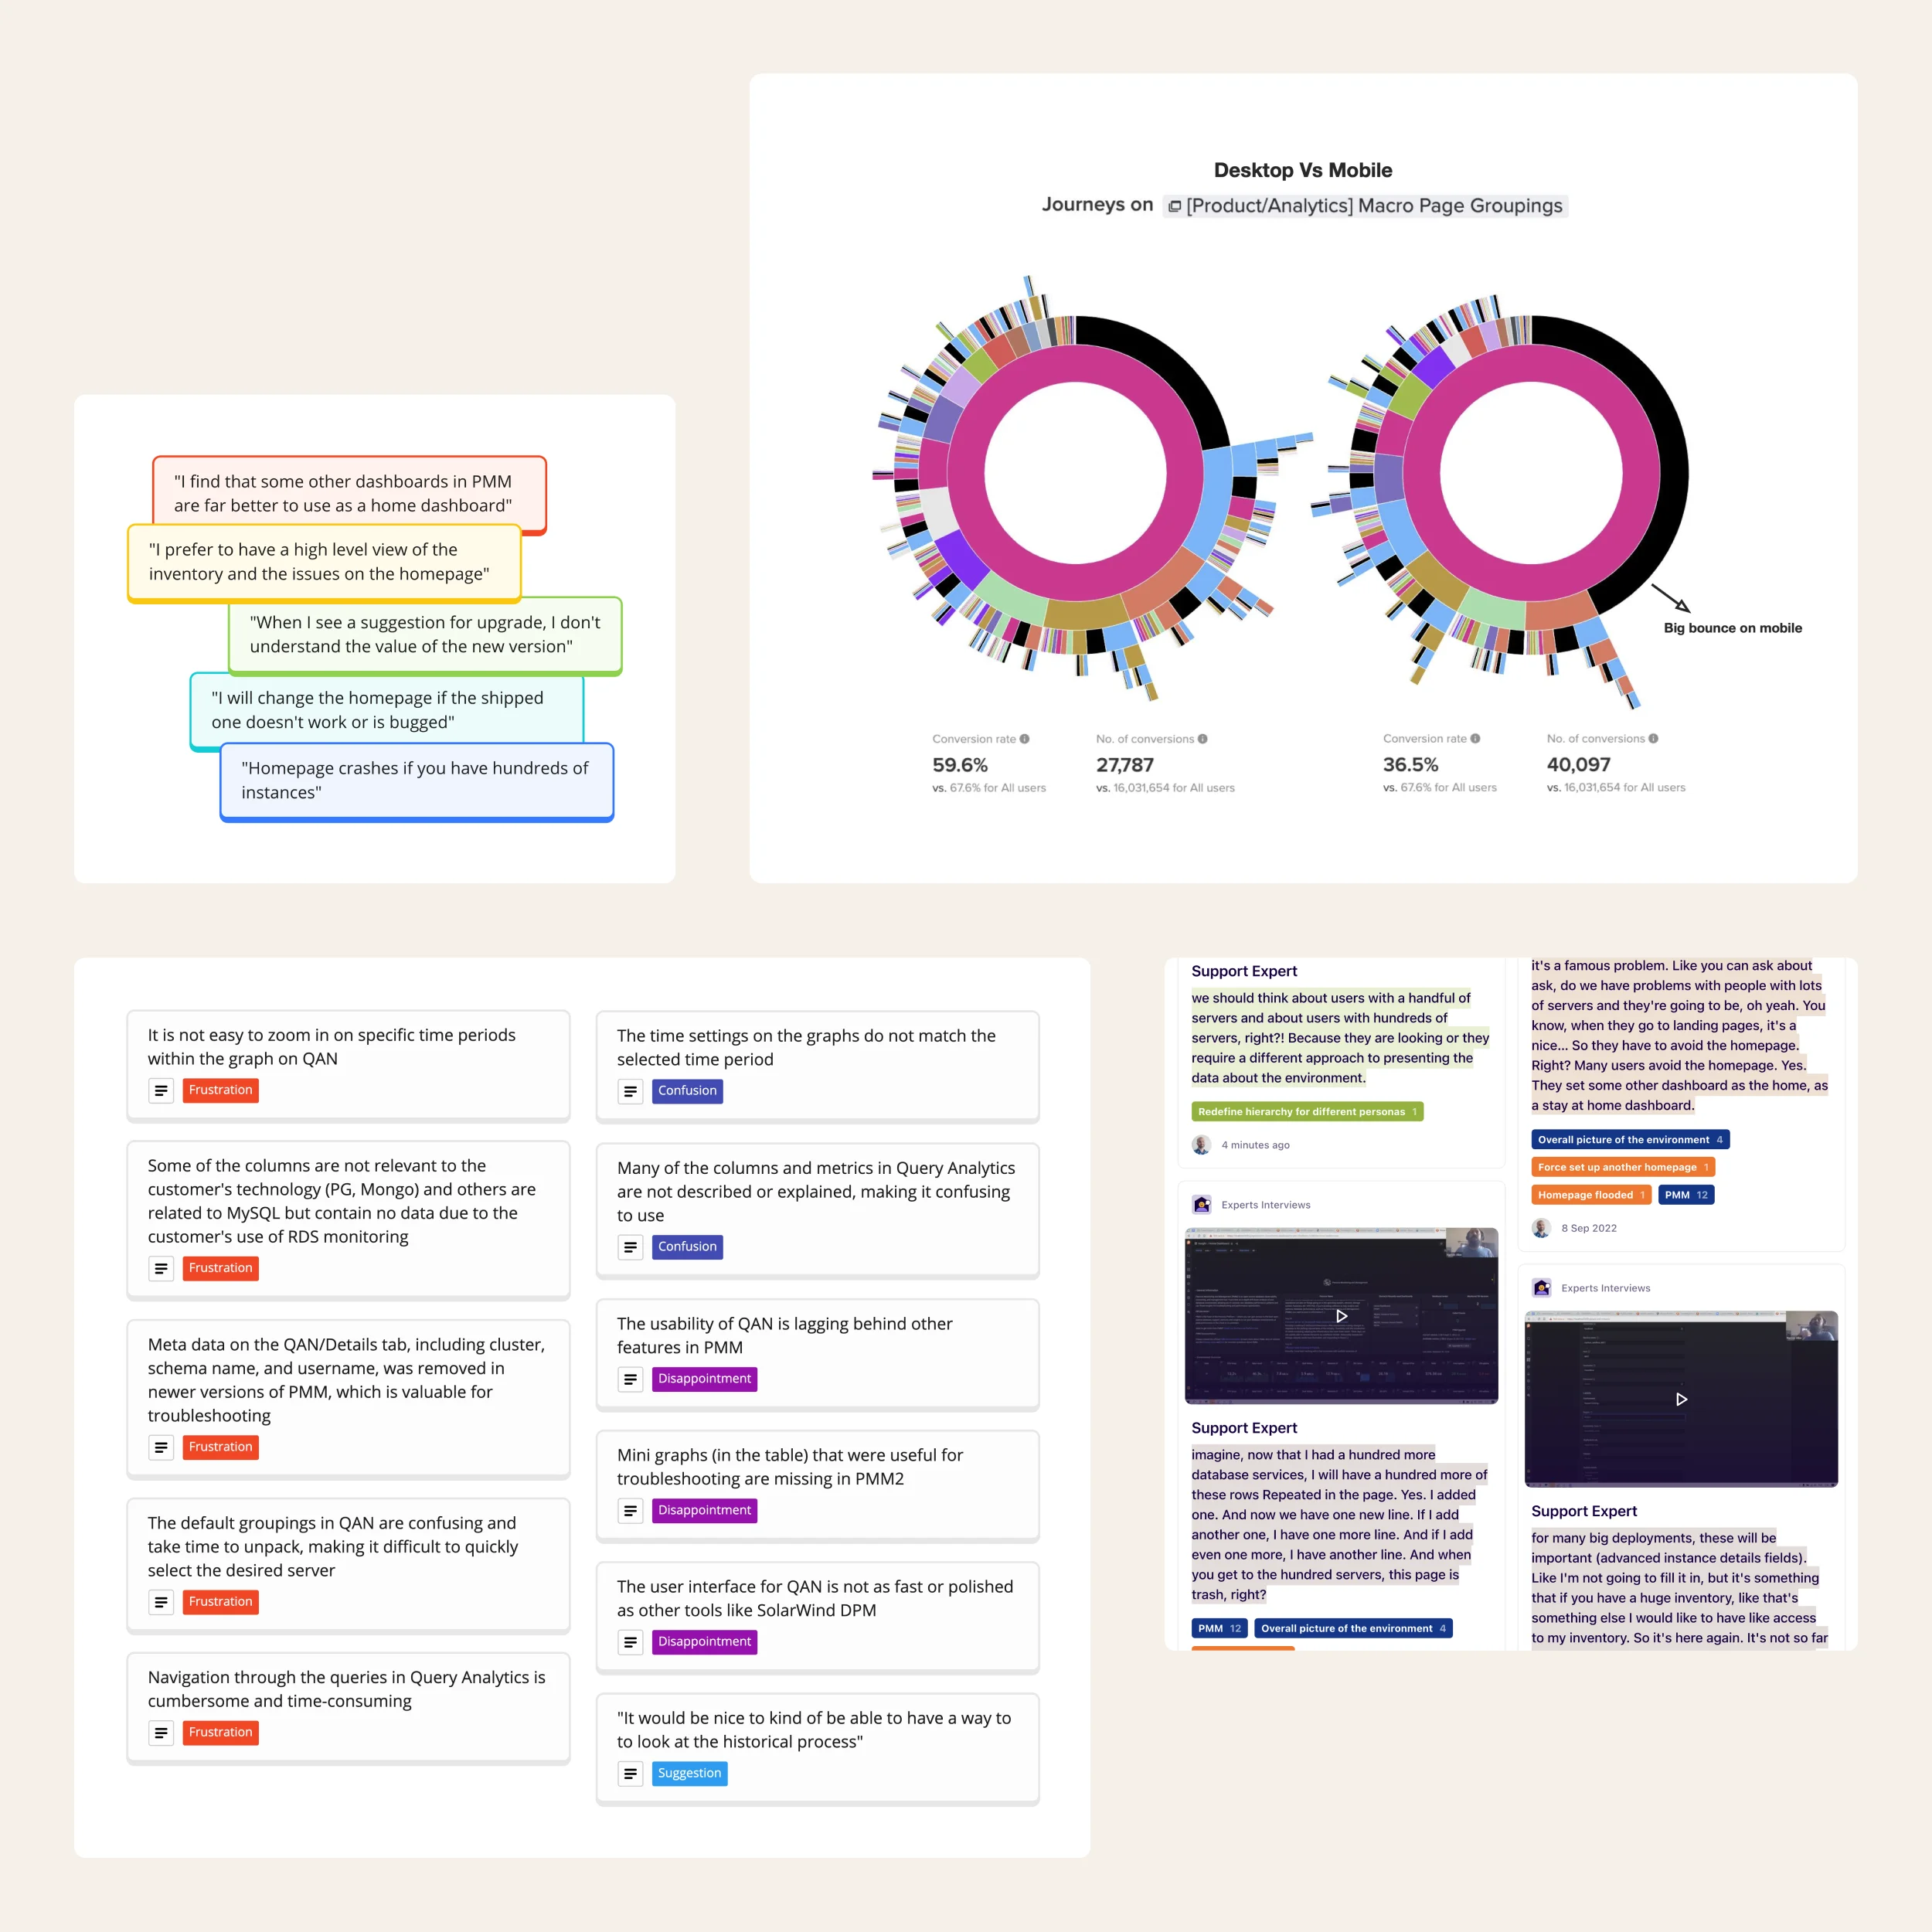 Screenshots of multiple captures of users’ and experts’ quotes and multicolored charts.